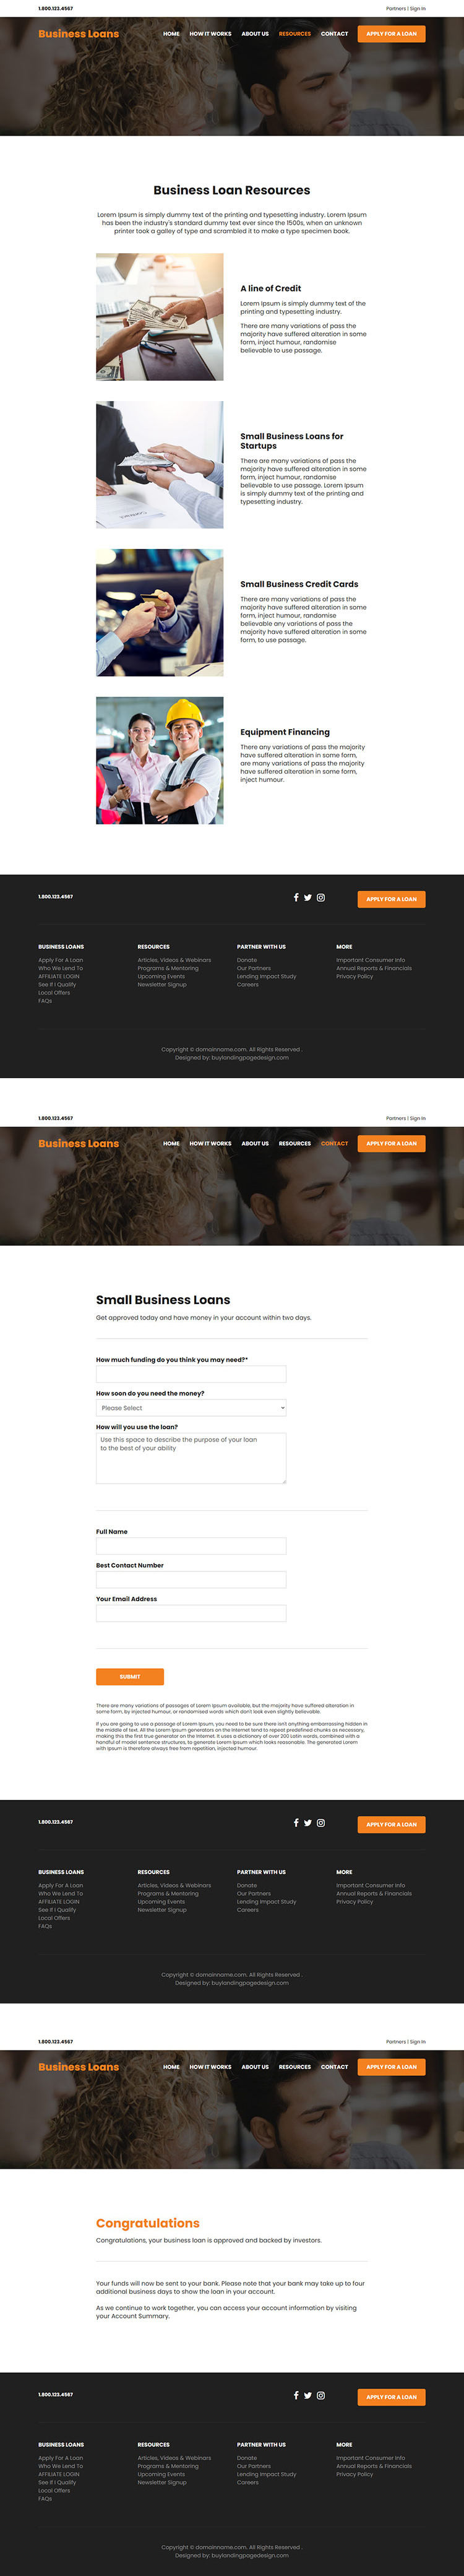 affordable small business loan responsive website design